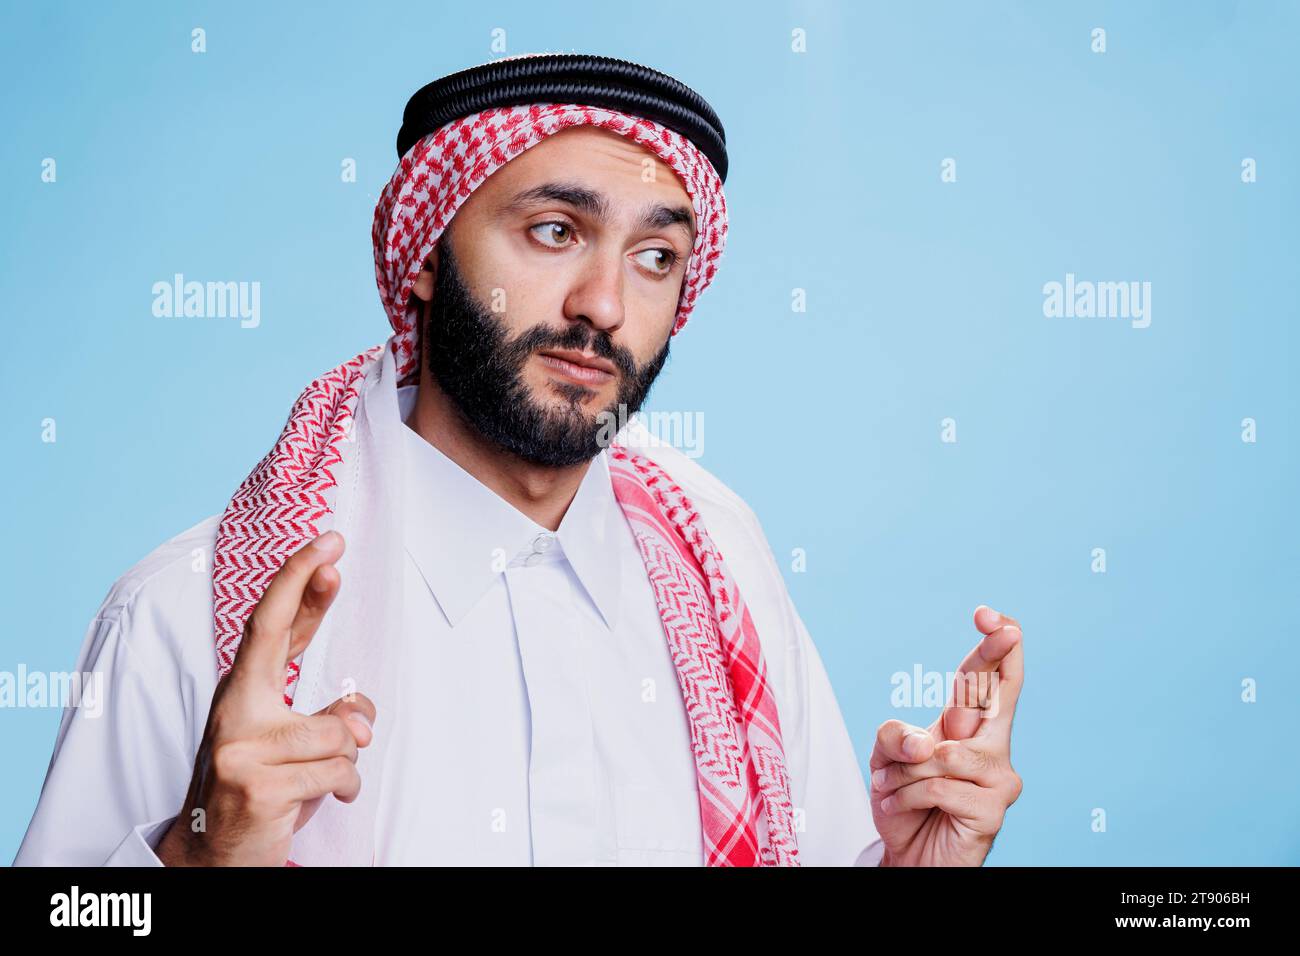 Arab man wearing traditional thobe and headscarf crossing fingers for good luck. Person dressed in islamic cultural clothes showing superstitious gesture, pleading for success Stock Photo